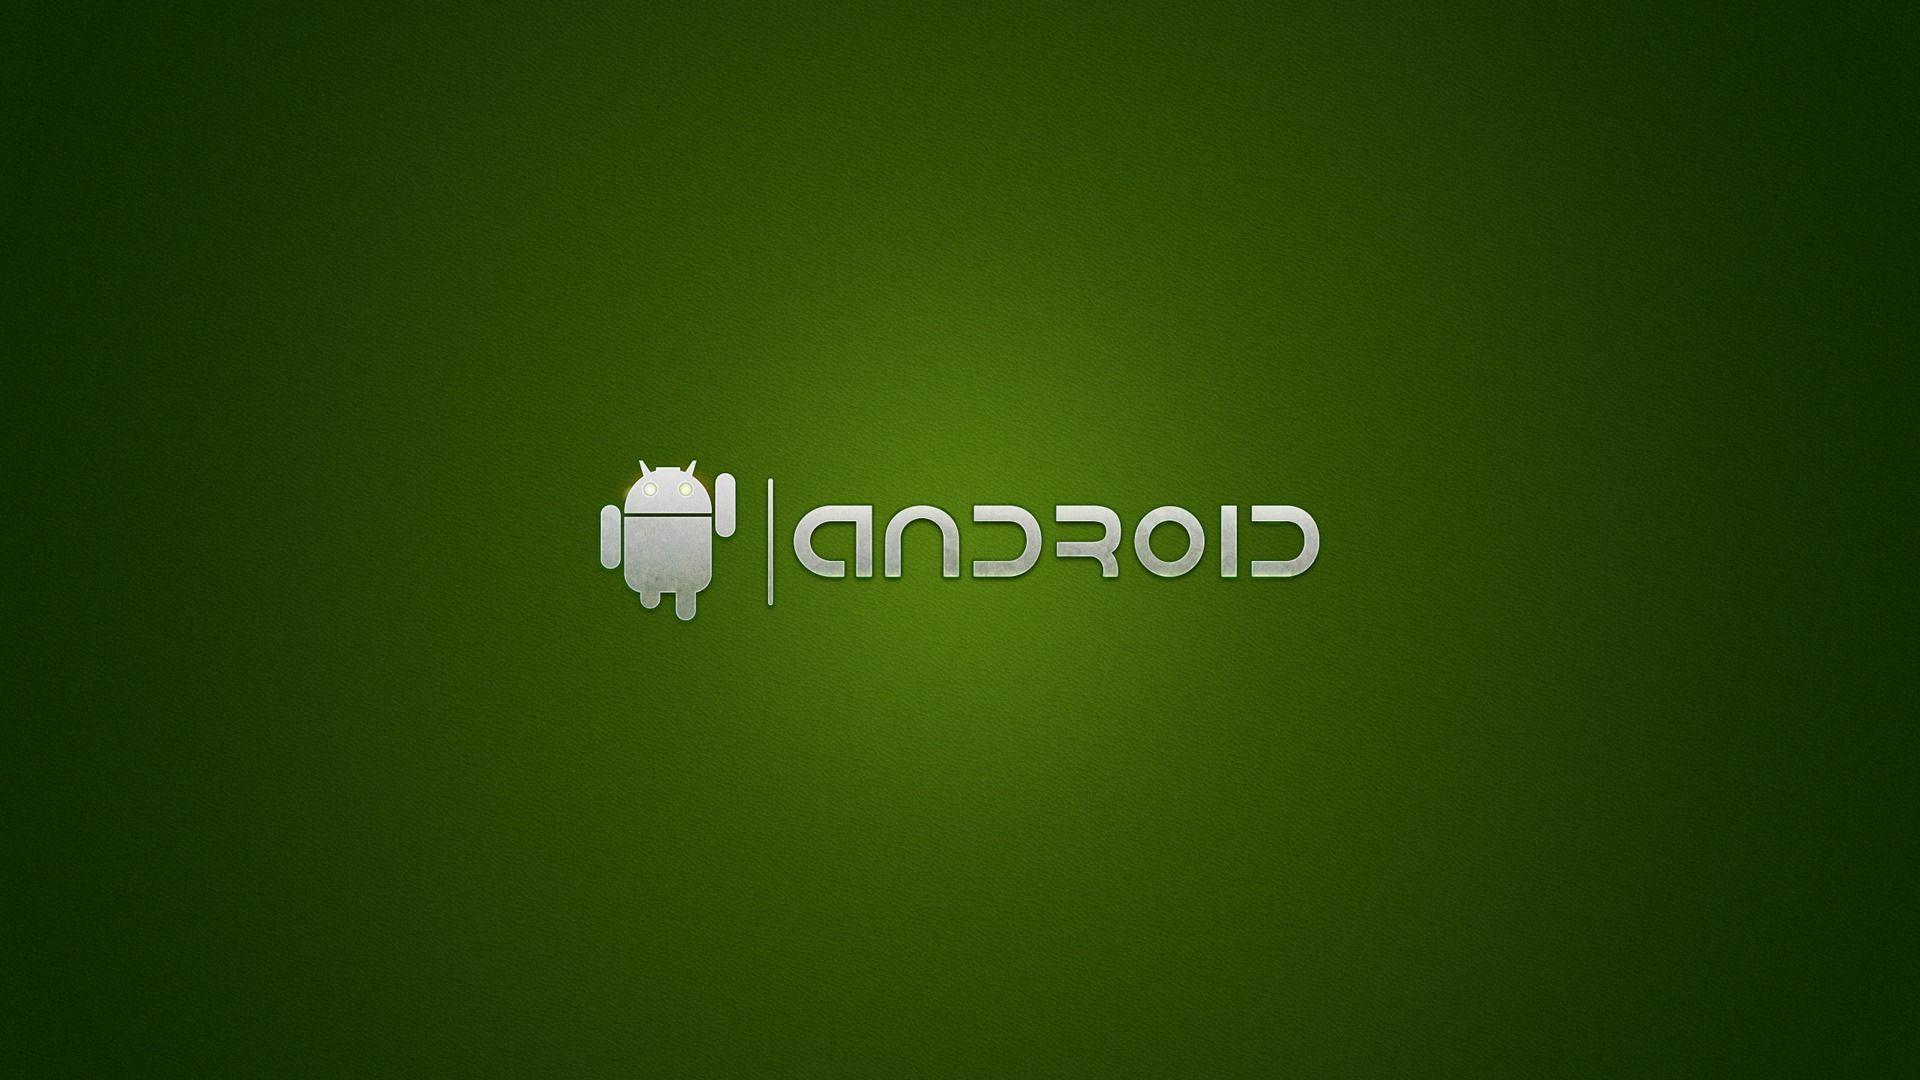 High Resolution Wallpaper For Android